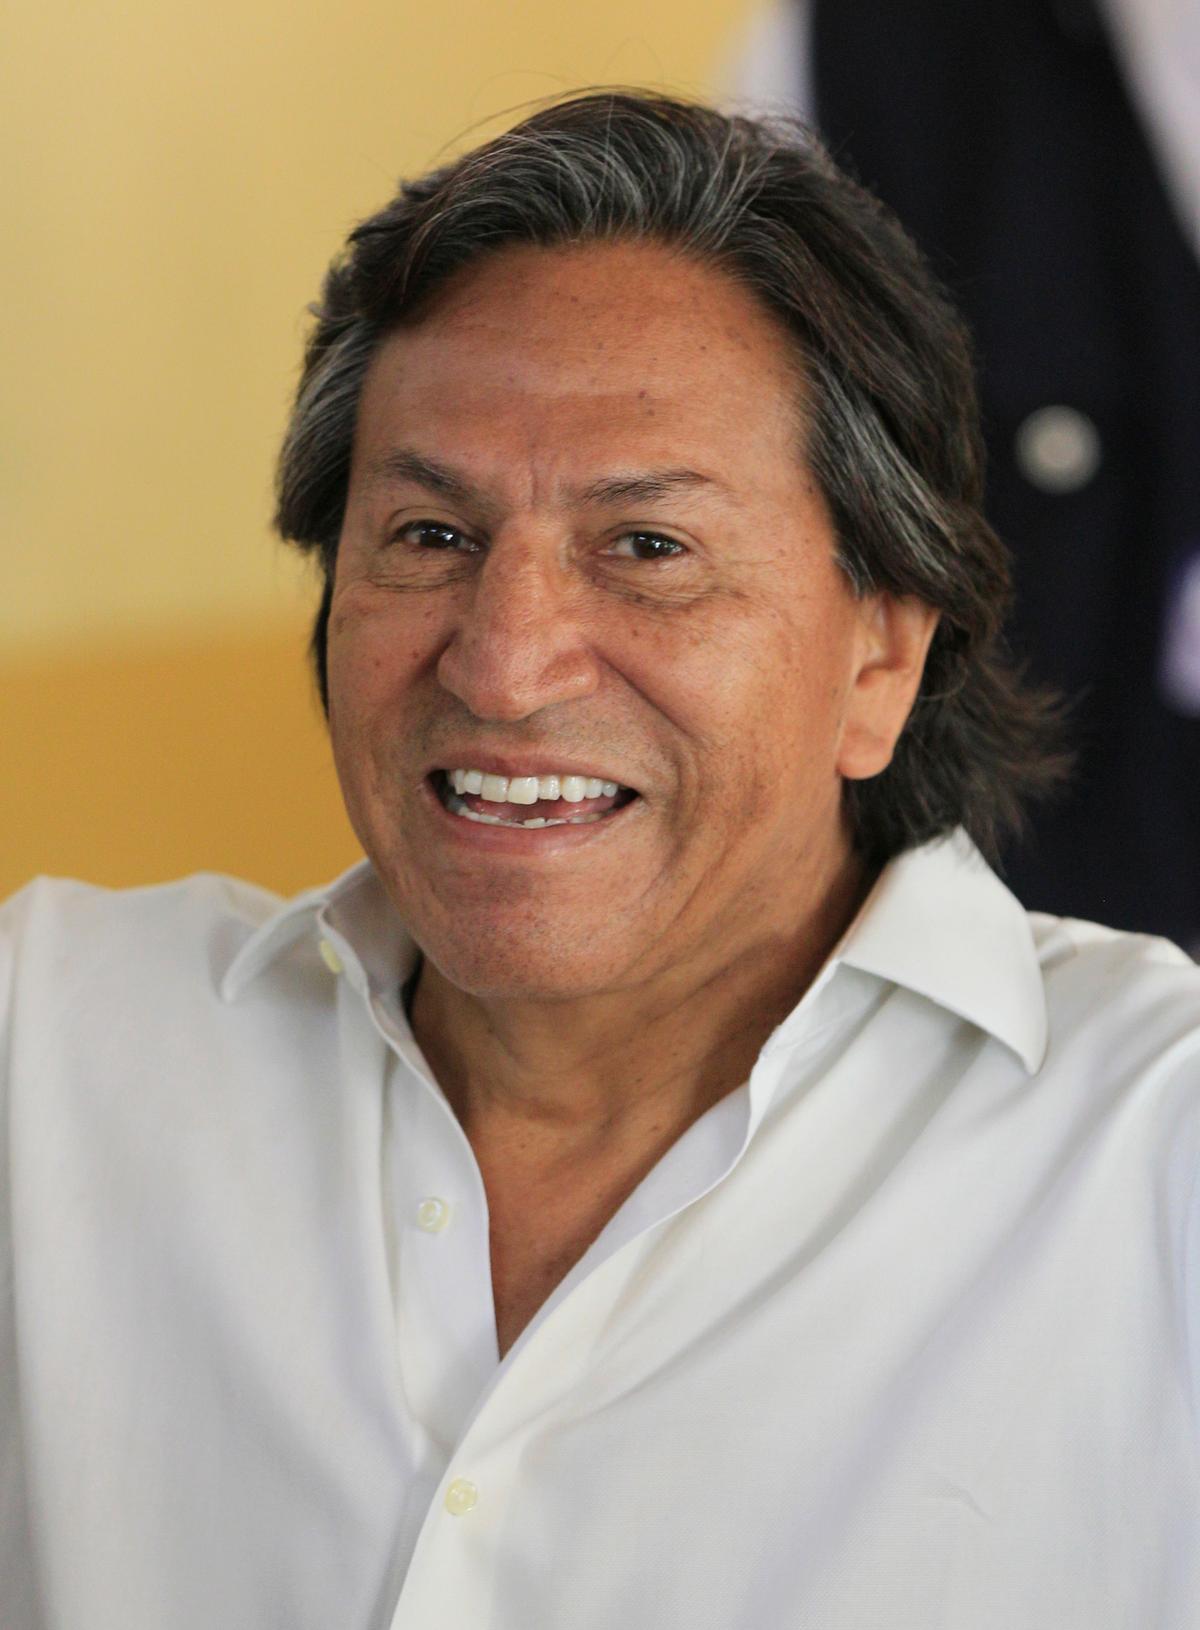 Alejandro Toledo after voting in the general elections, in Lima, Peru on April 10, 2011. (AP Photo/Martin Mejia)